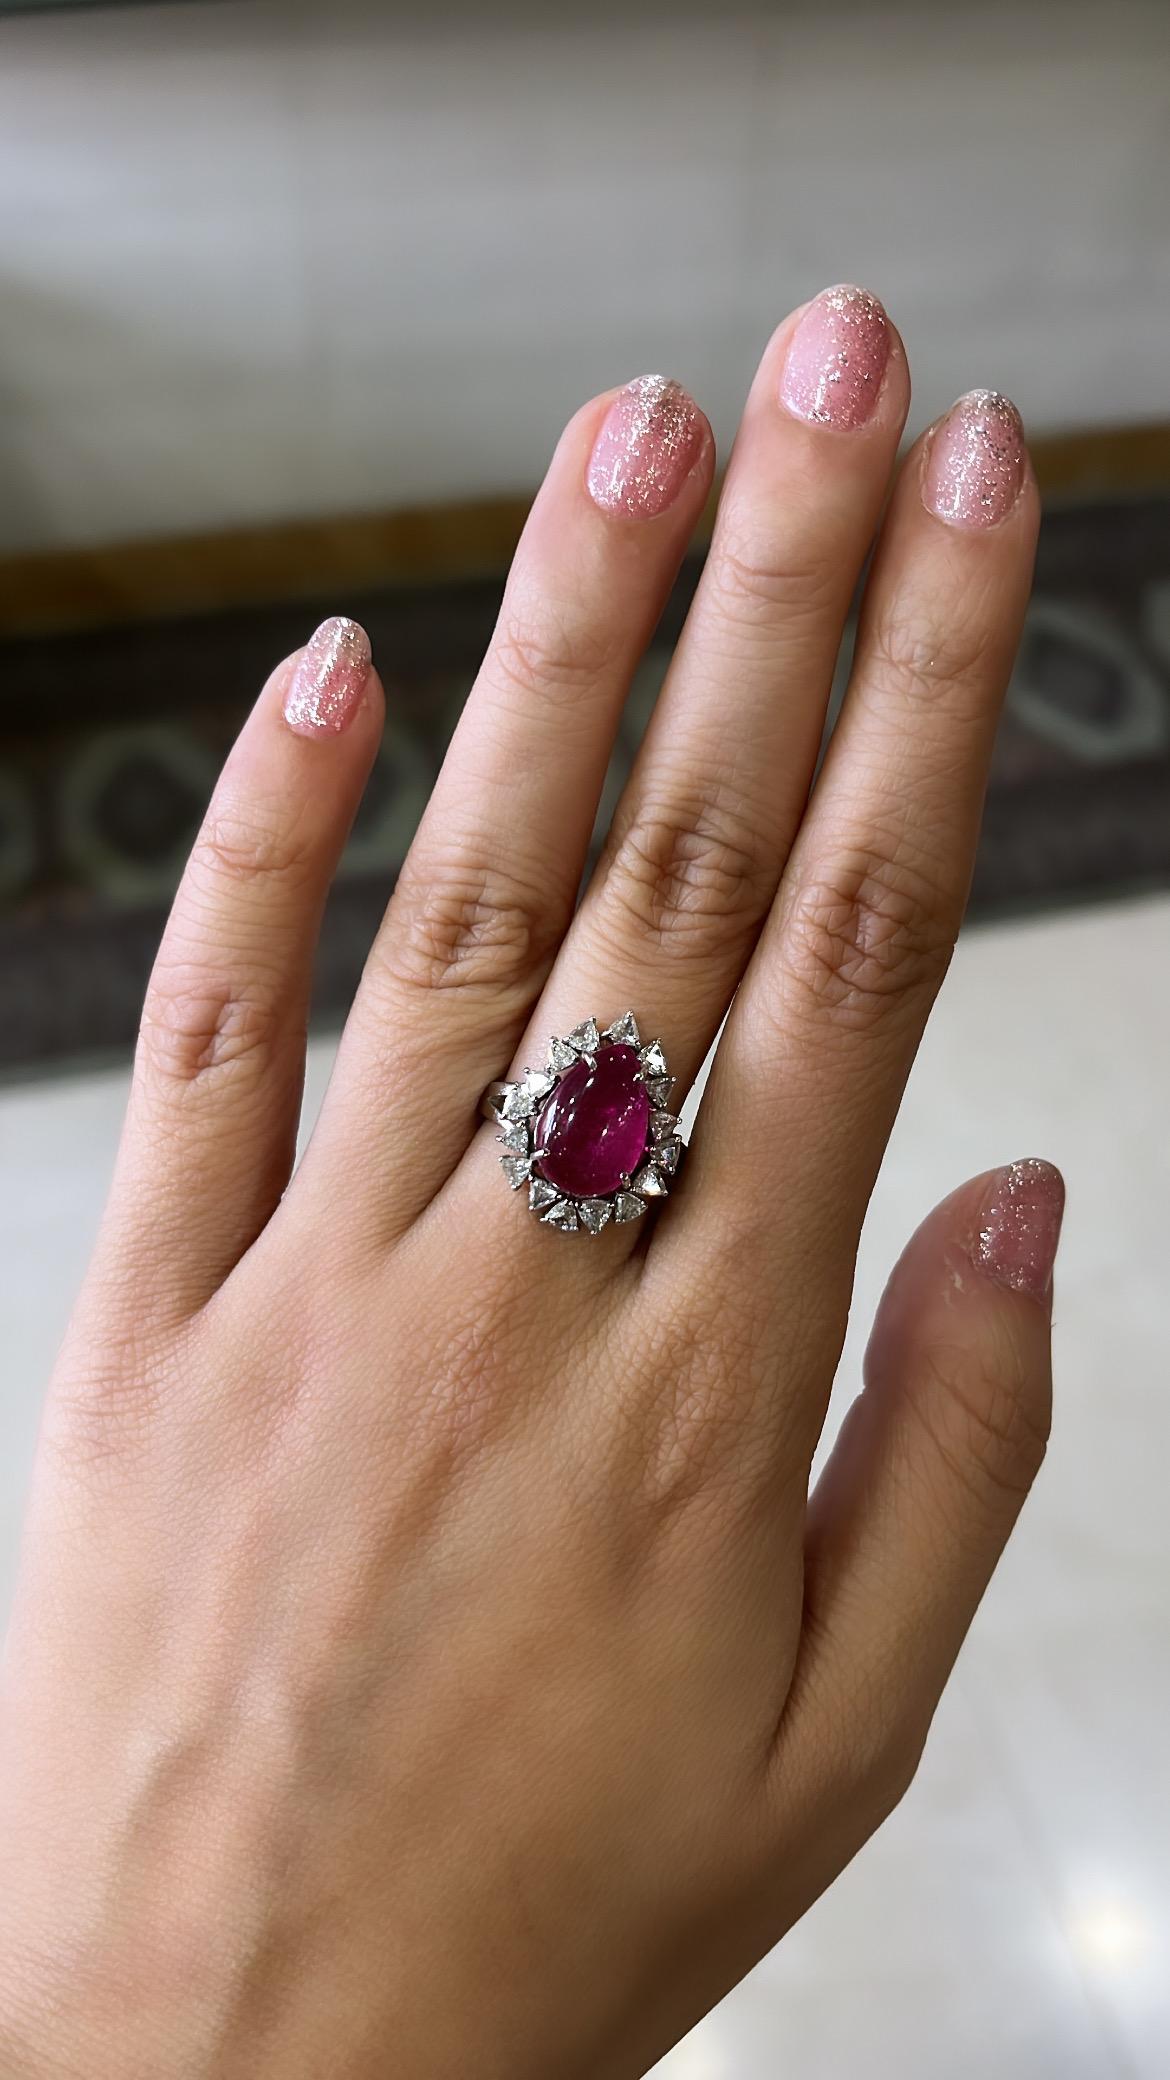 Set in 18K Gold, Natural Tourmaline Cabochon & Diamonds Engagement/Cocktail Ring For Sale 2